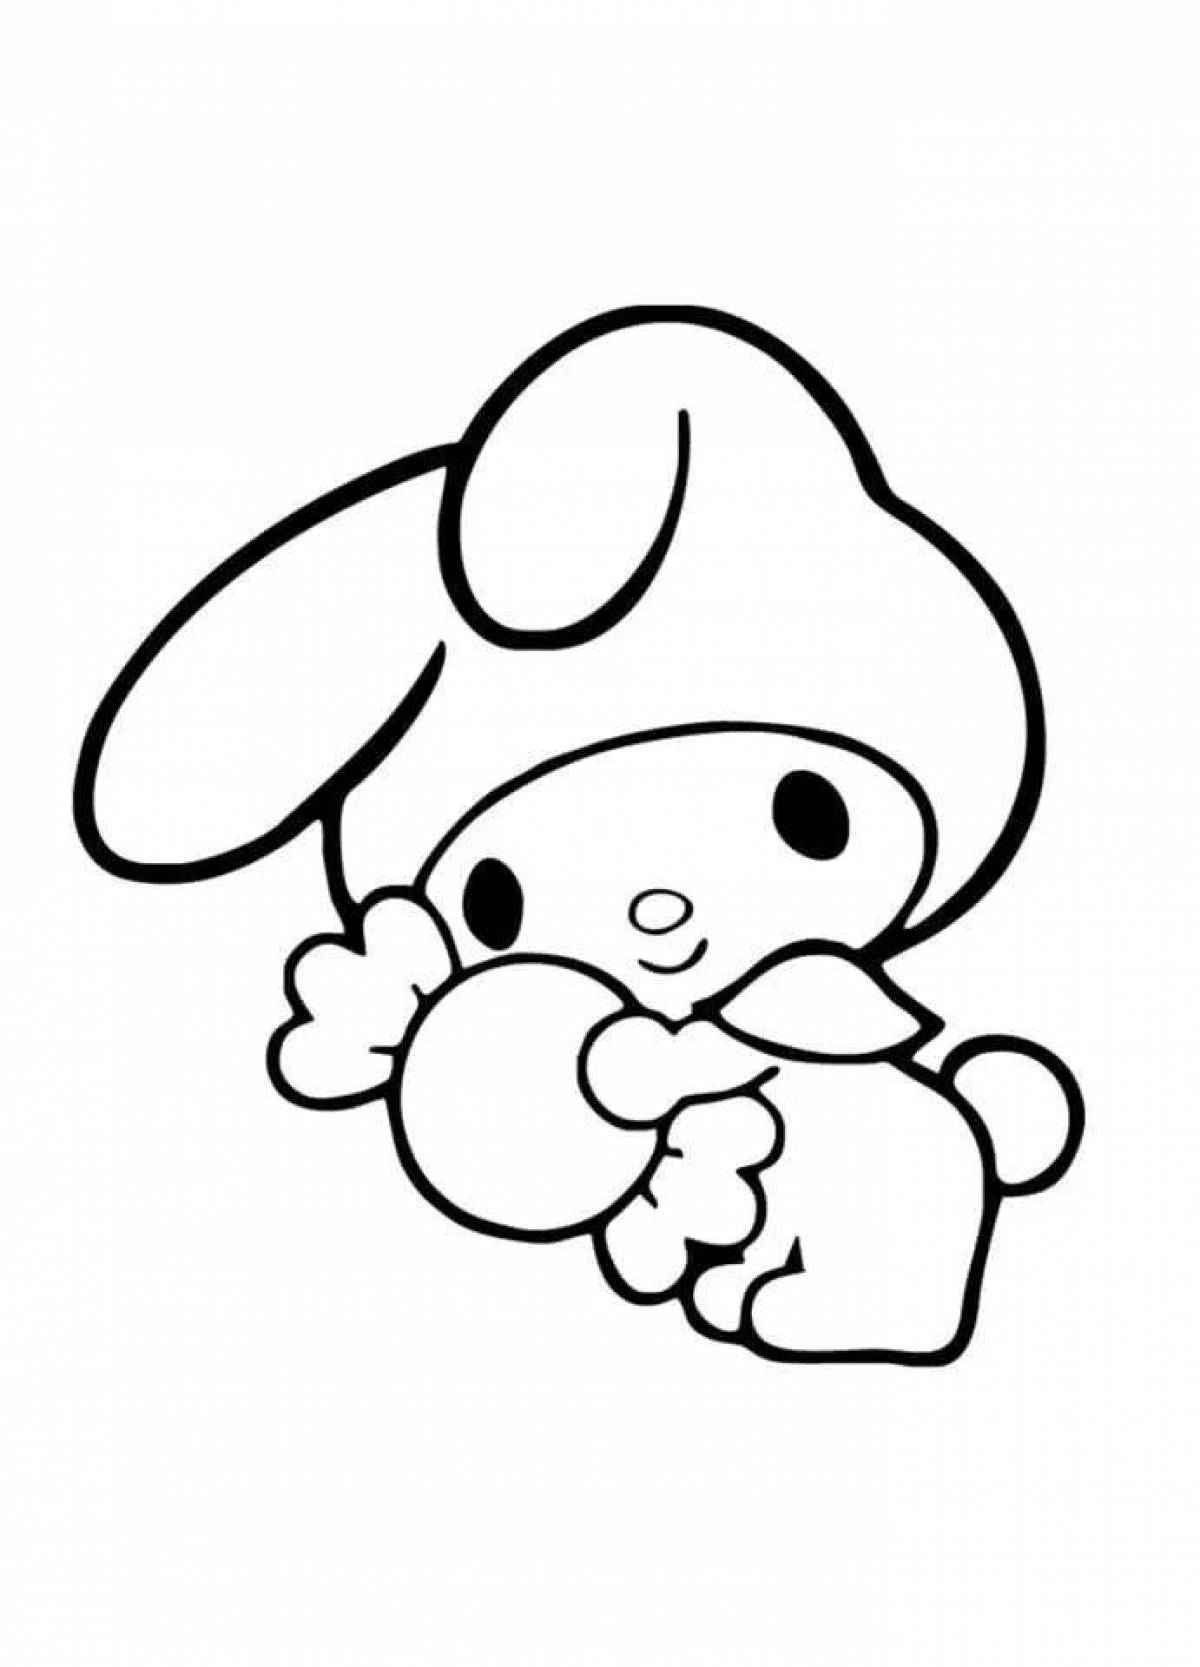 Funny my melody coloring page